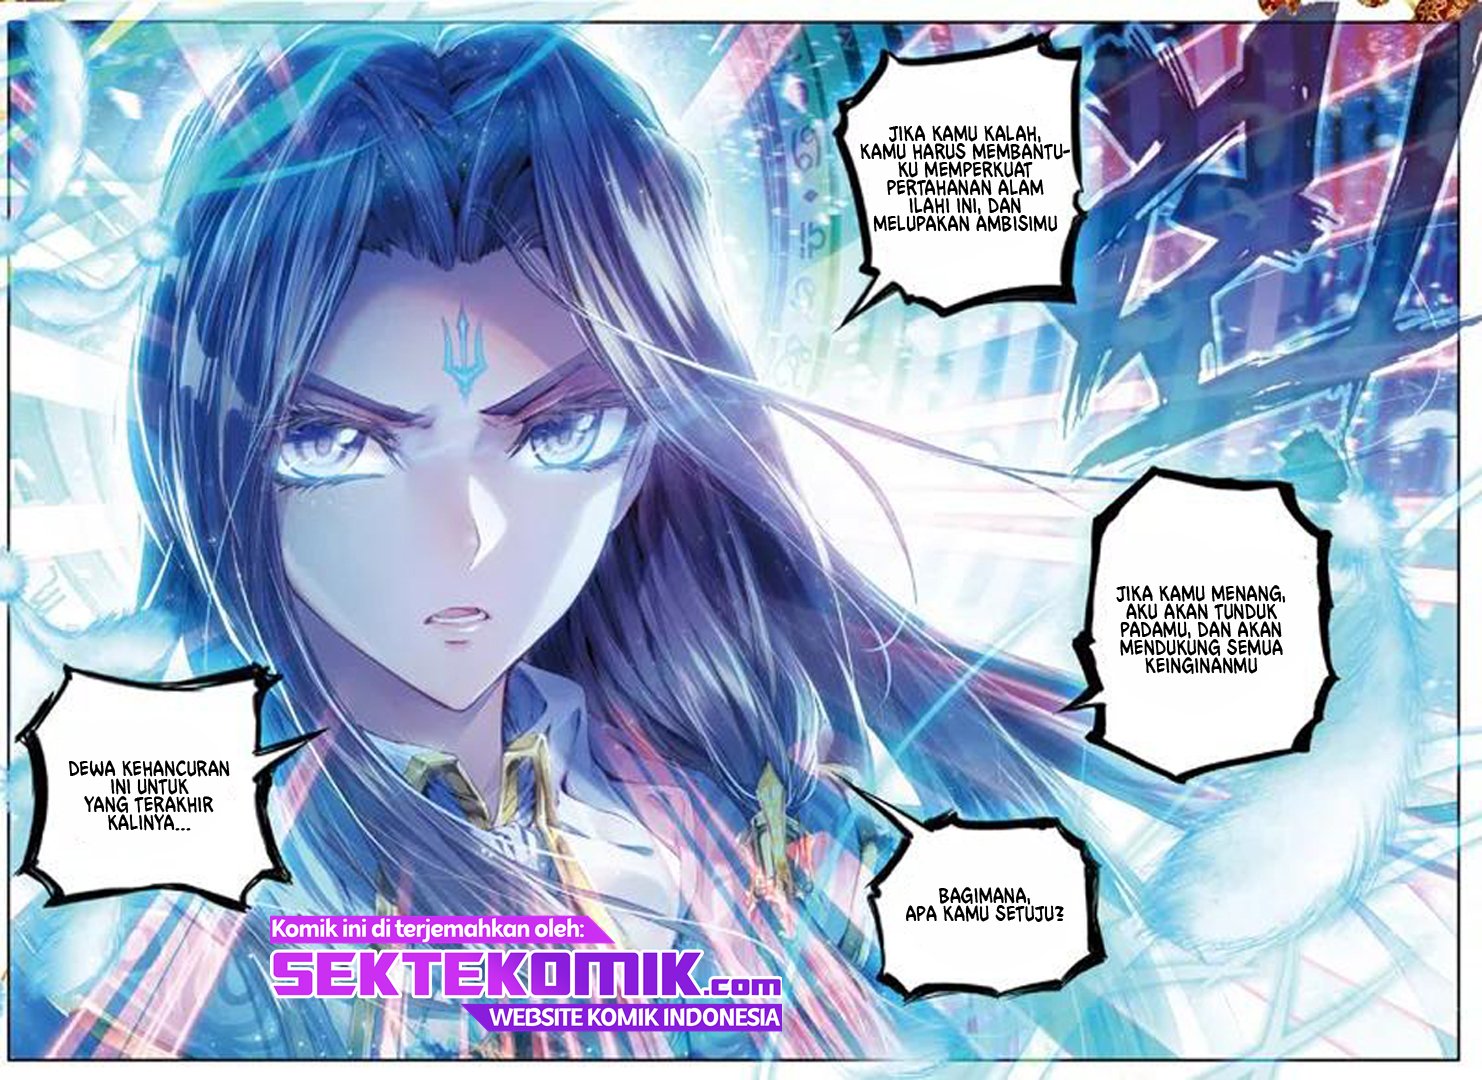 Soul Land – Legend of The Gods’ Realm Chapter 46.2